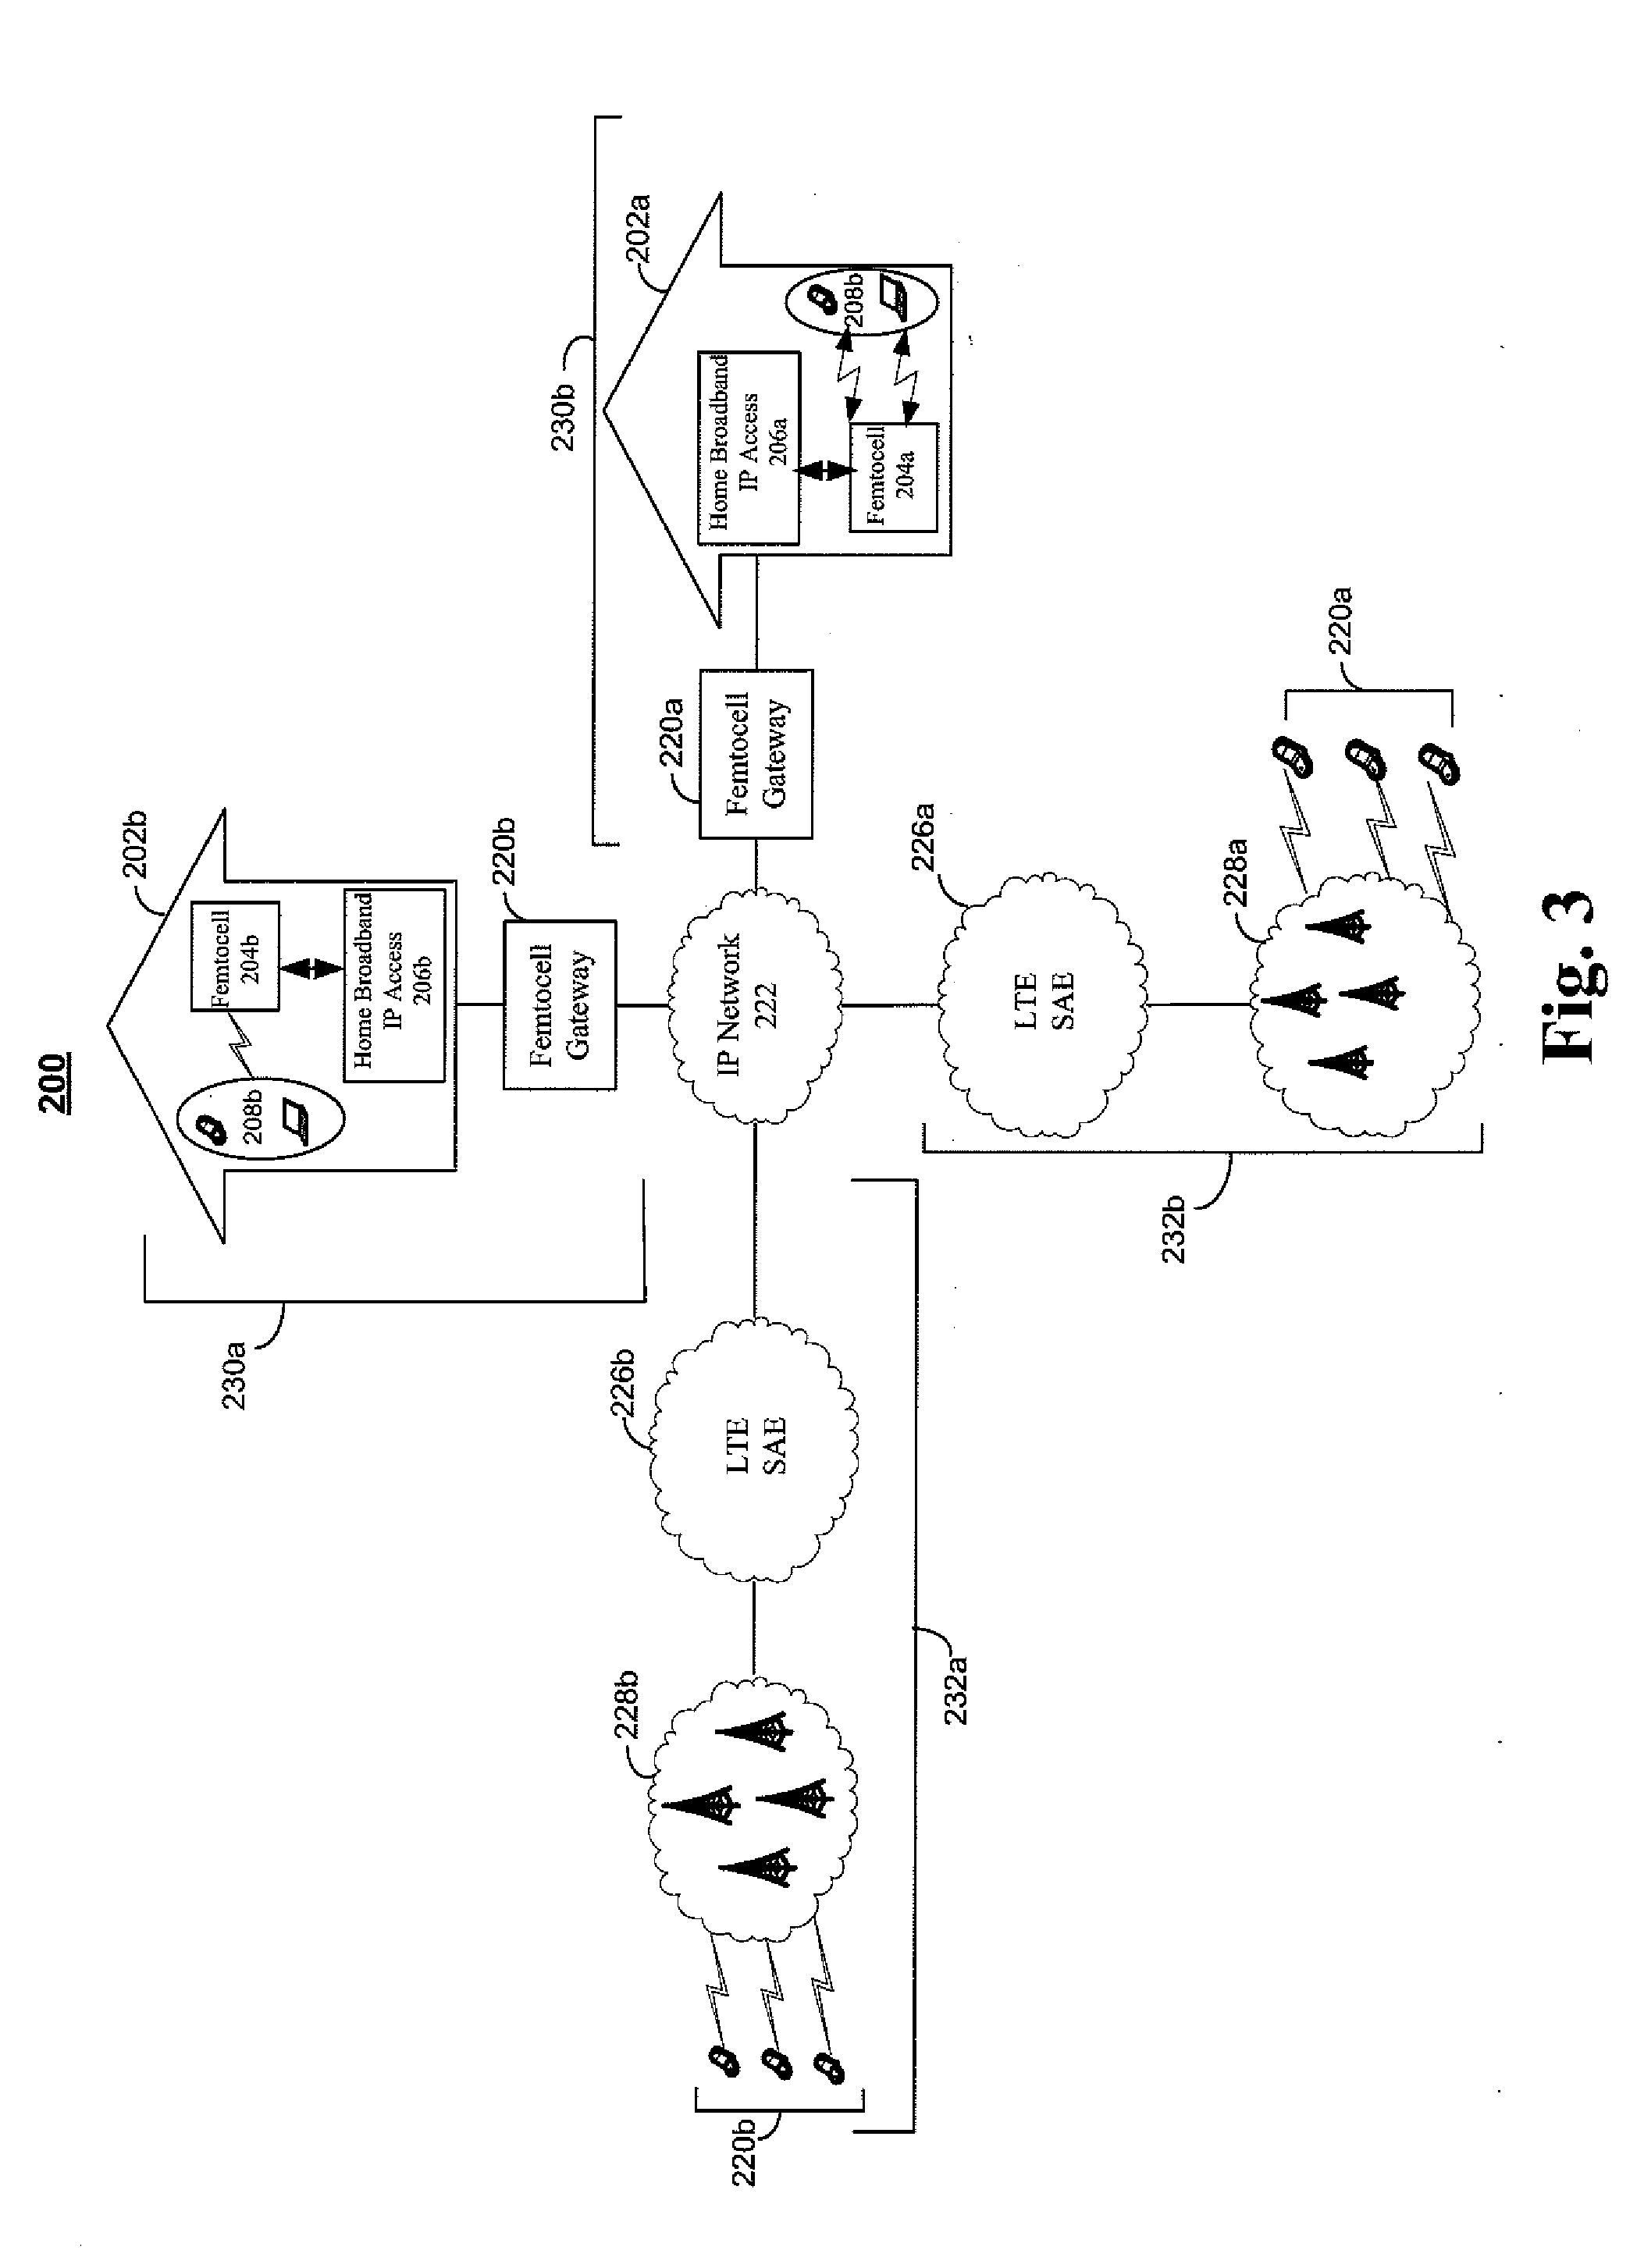 System and method for resource allocation of a LTE network integrated with femtocells